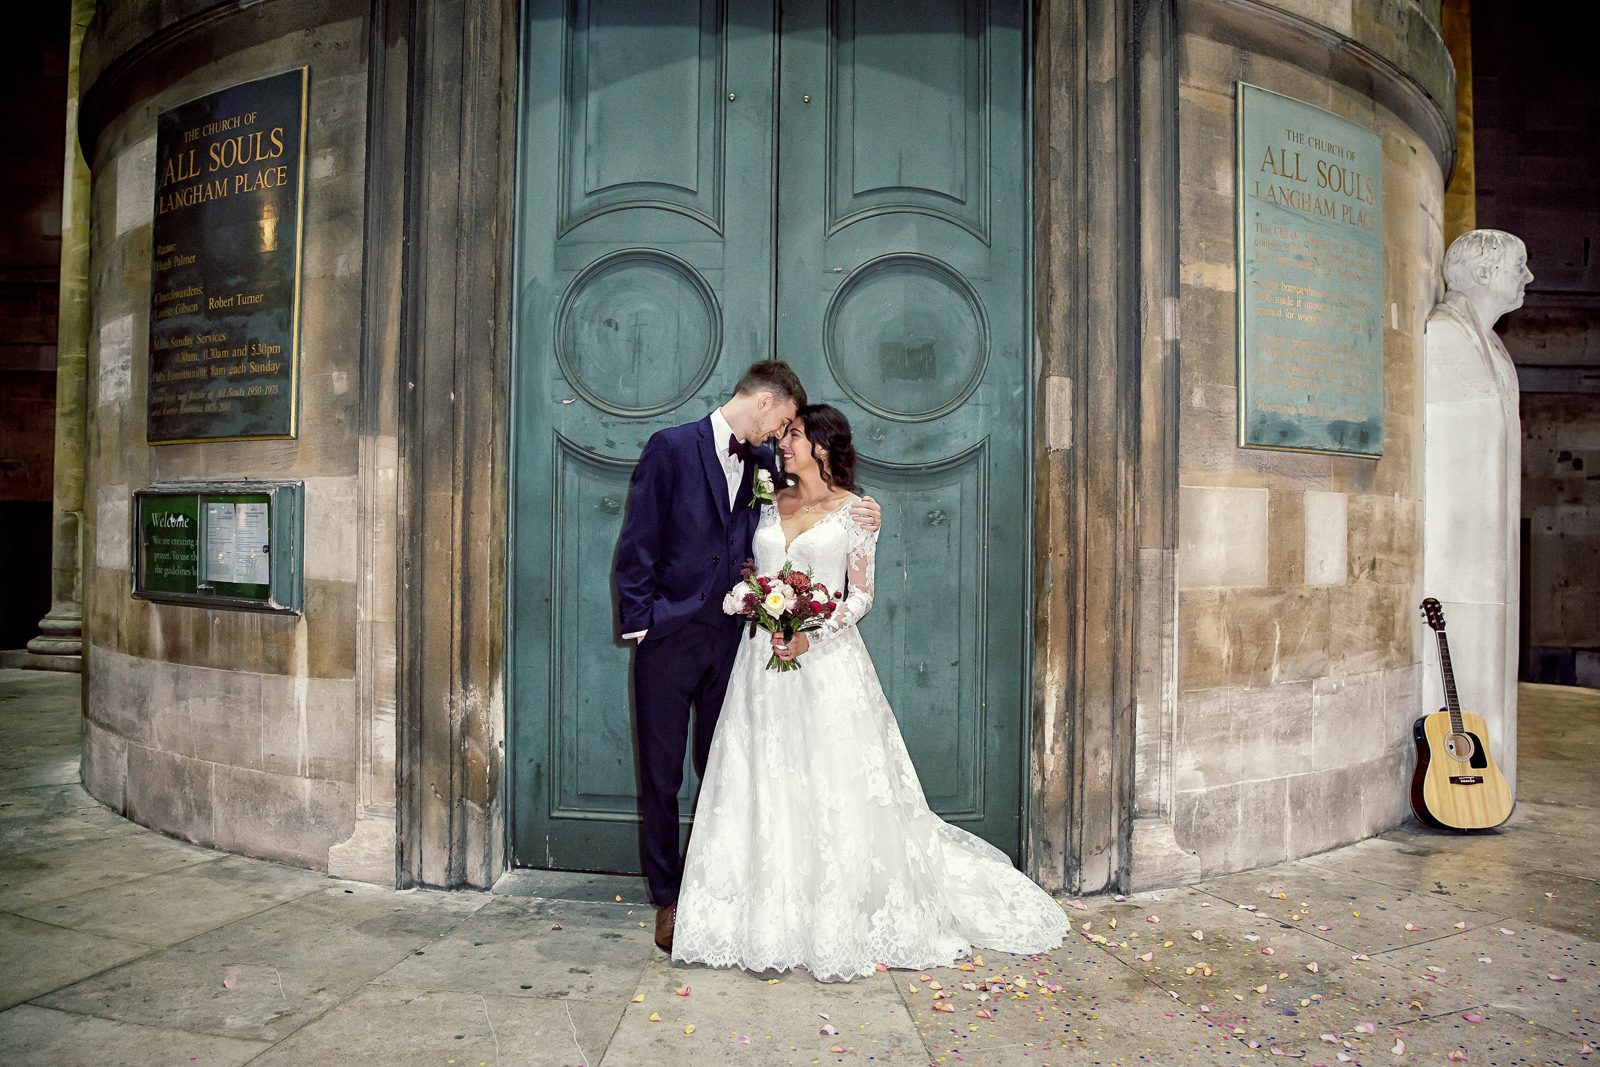 All souls church wedding London bride and groom image